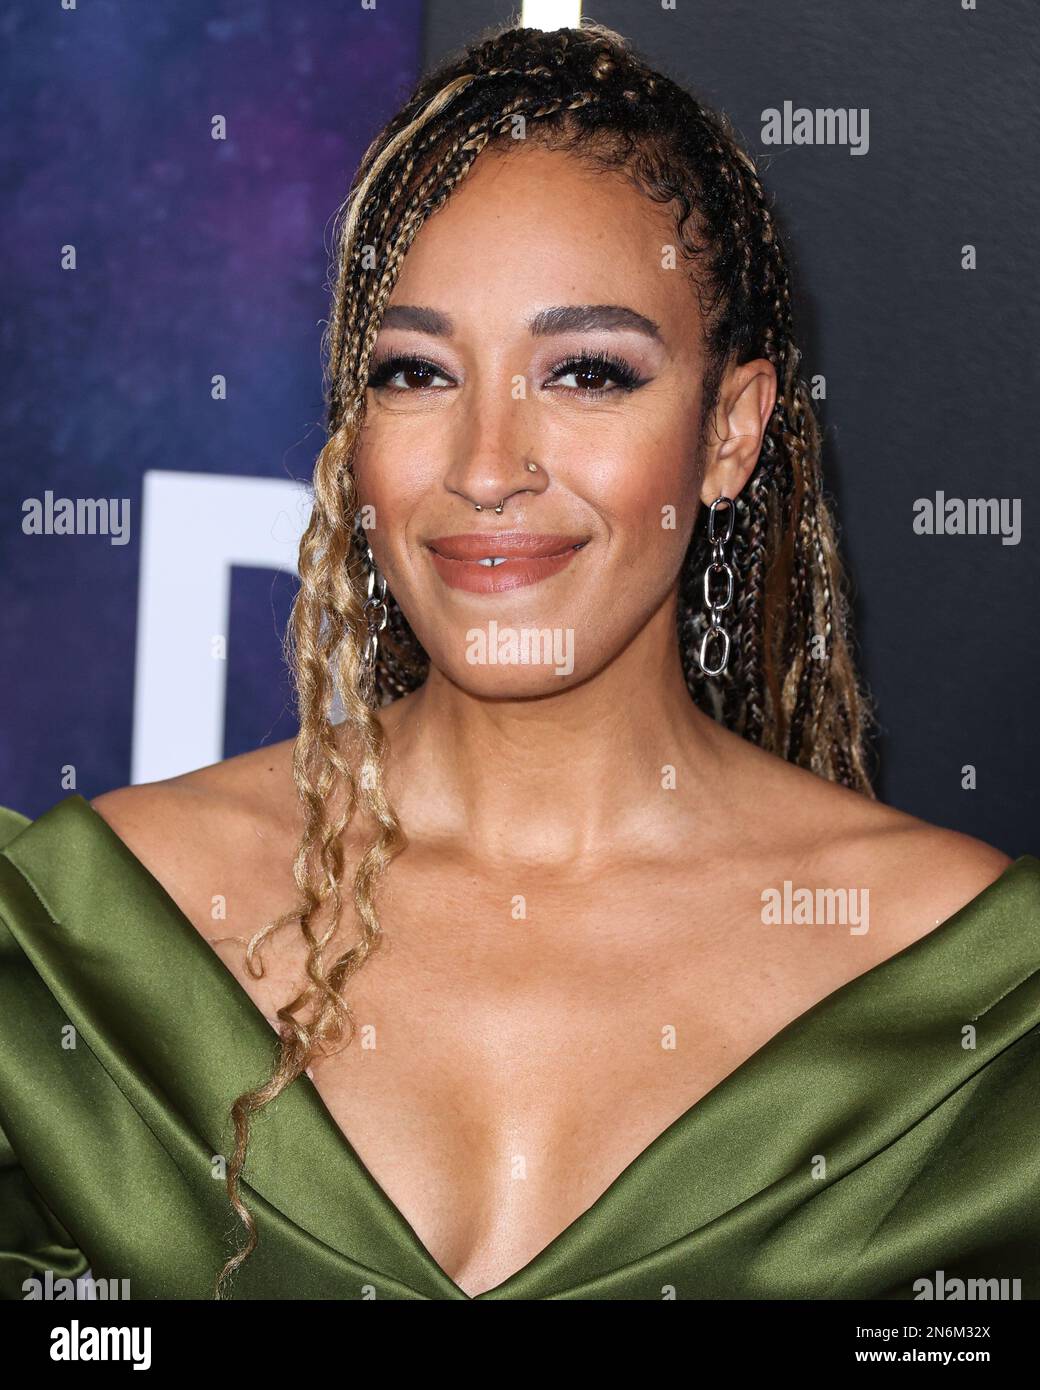 Hollywood, United States. 09th Feb, 2023. HOLLYWOOD, LOS ANGELES, CALIFORNIA, USA - FEBRUARY 09: American musician, comedian and actress Tawny Newsome arrives at the Los Angeles Premiere Of Paramount 's Original Series 'Star Trek: Picard' Third And Final Season held at the TCL Chinese Theatre IMAX on February 9, 2023 in Hollywood, Los Angeles, California, United States. (Photo by Xavier Collin/Image Press Agency) Credit: Image Press Agency/Alamy Live News Stock Photo